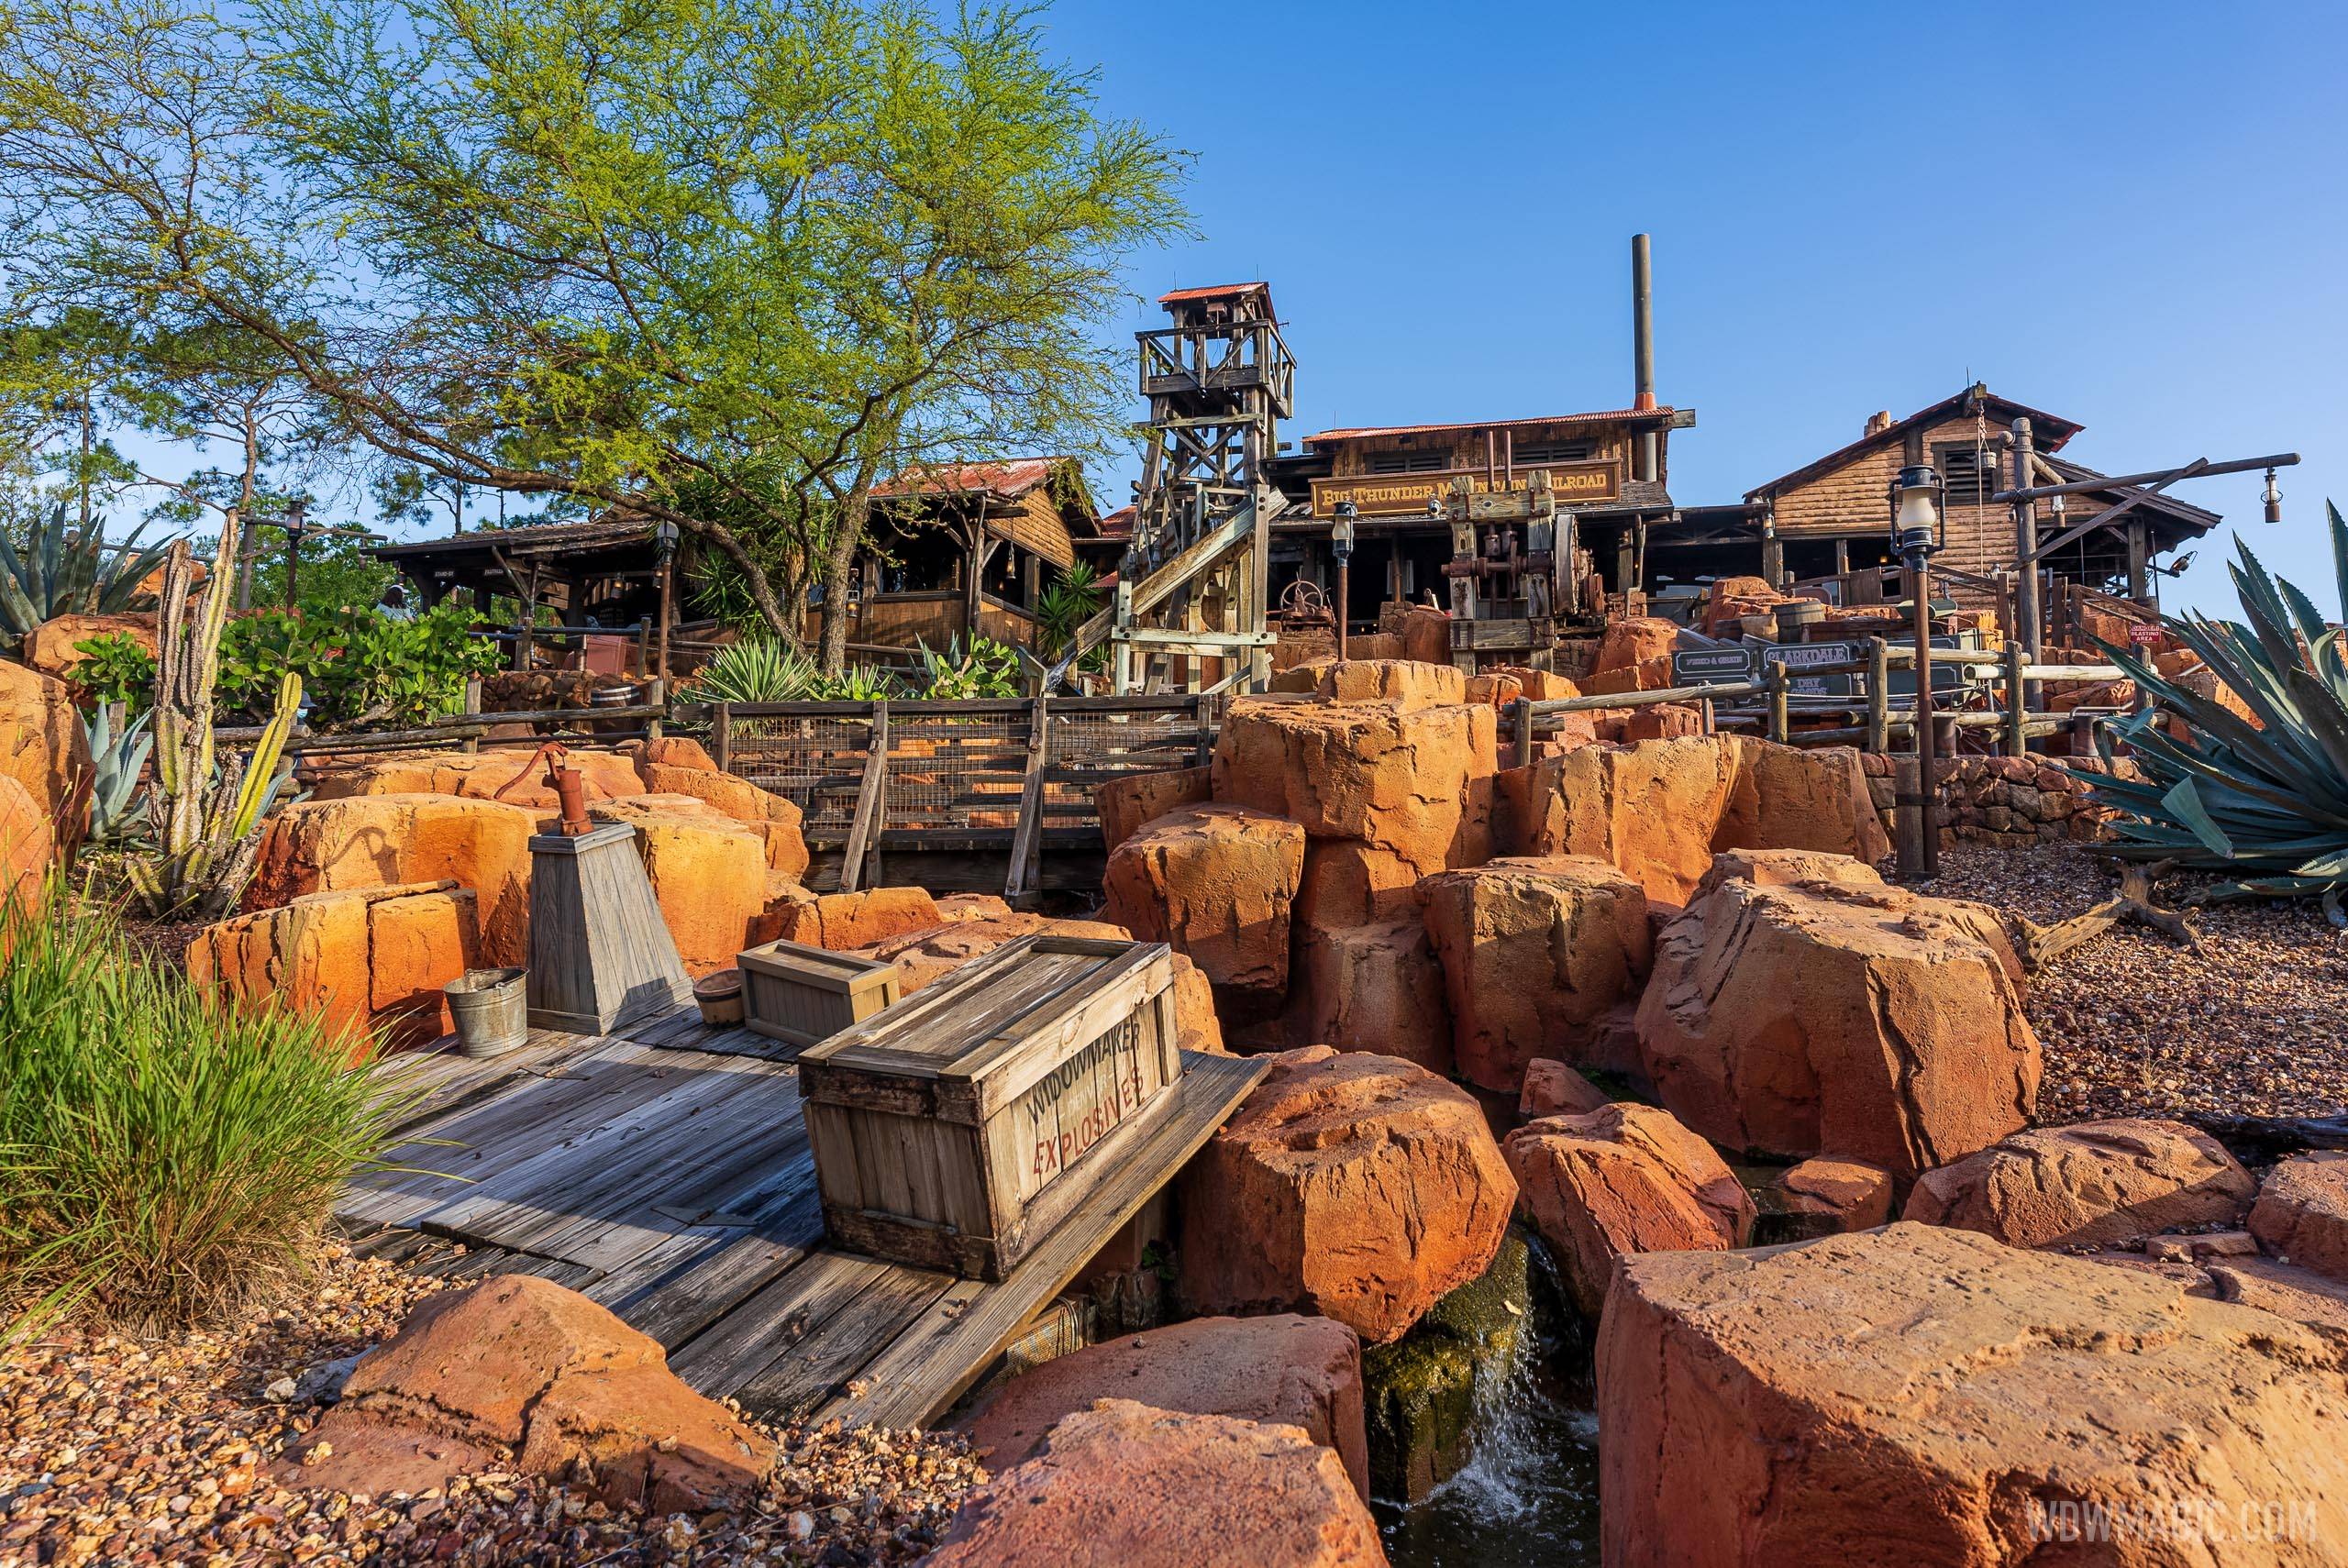 Most rides are close on the western side of the park, including Big Thunder Mountain.